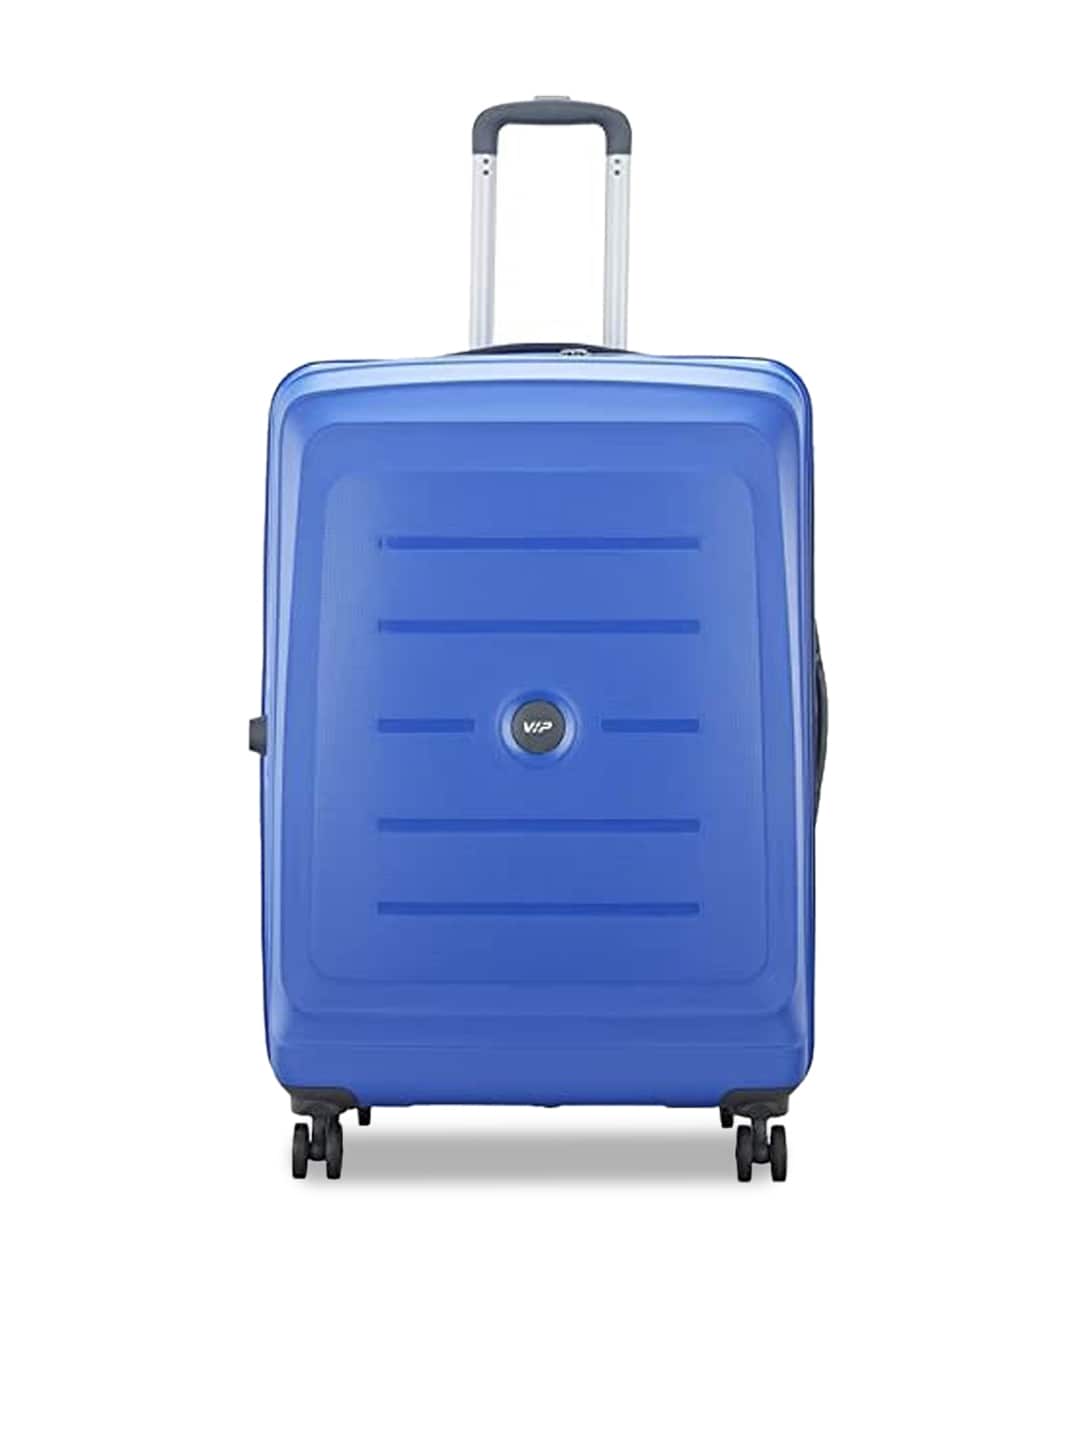 VIP Water Resistant Hard-Sided Large Trolley Suitcase